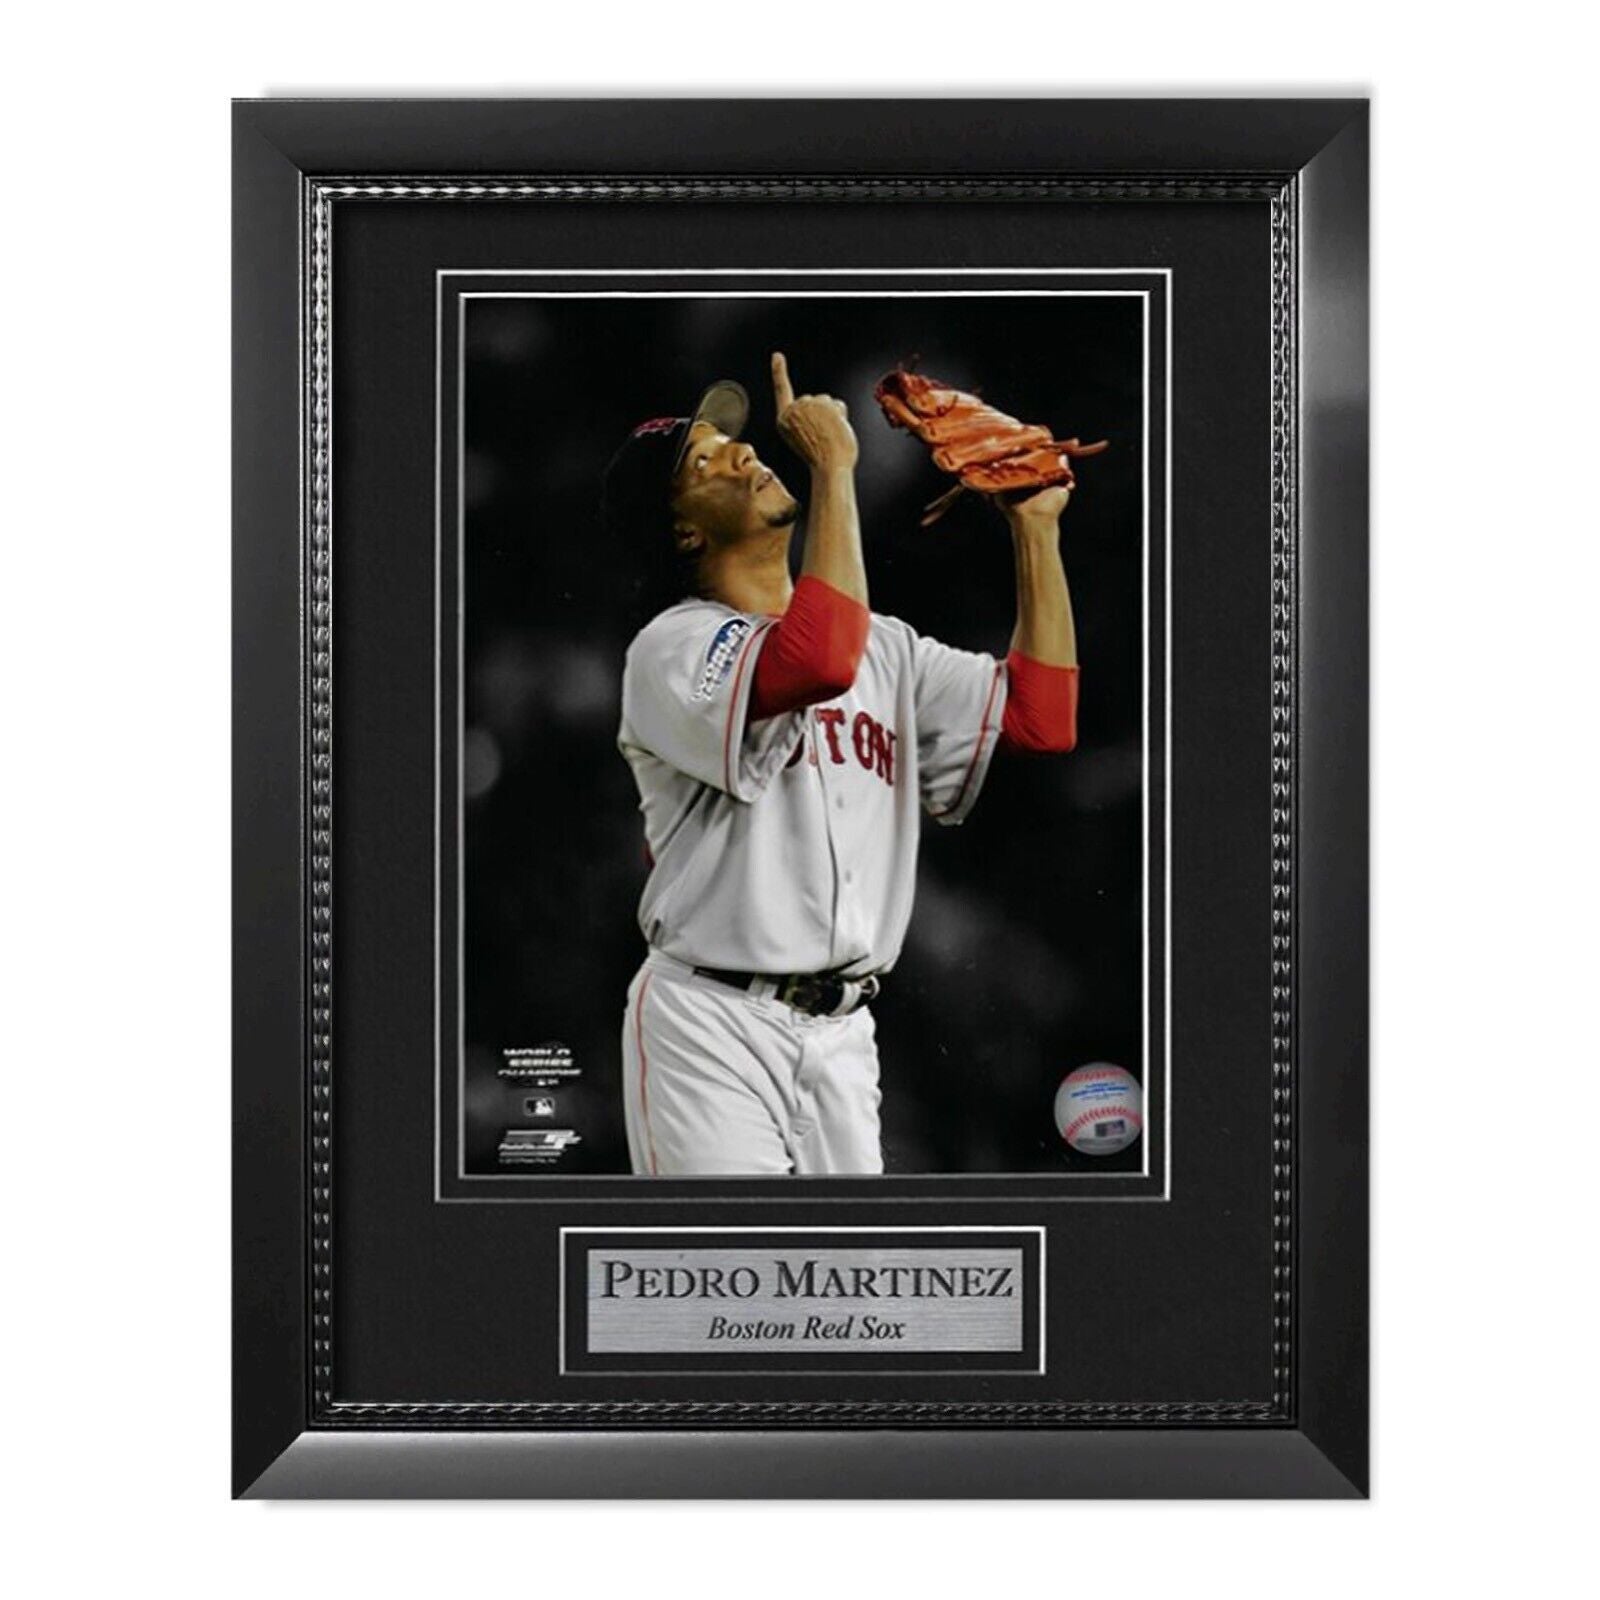 Pedro Martinez Boston Red Sox Unsigned Photo Framed to 11x14